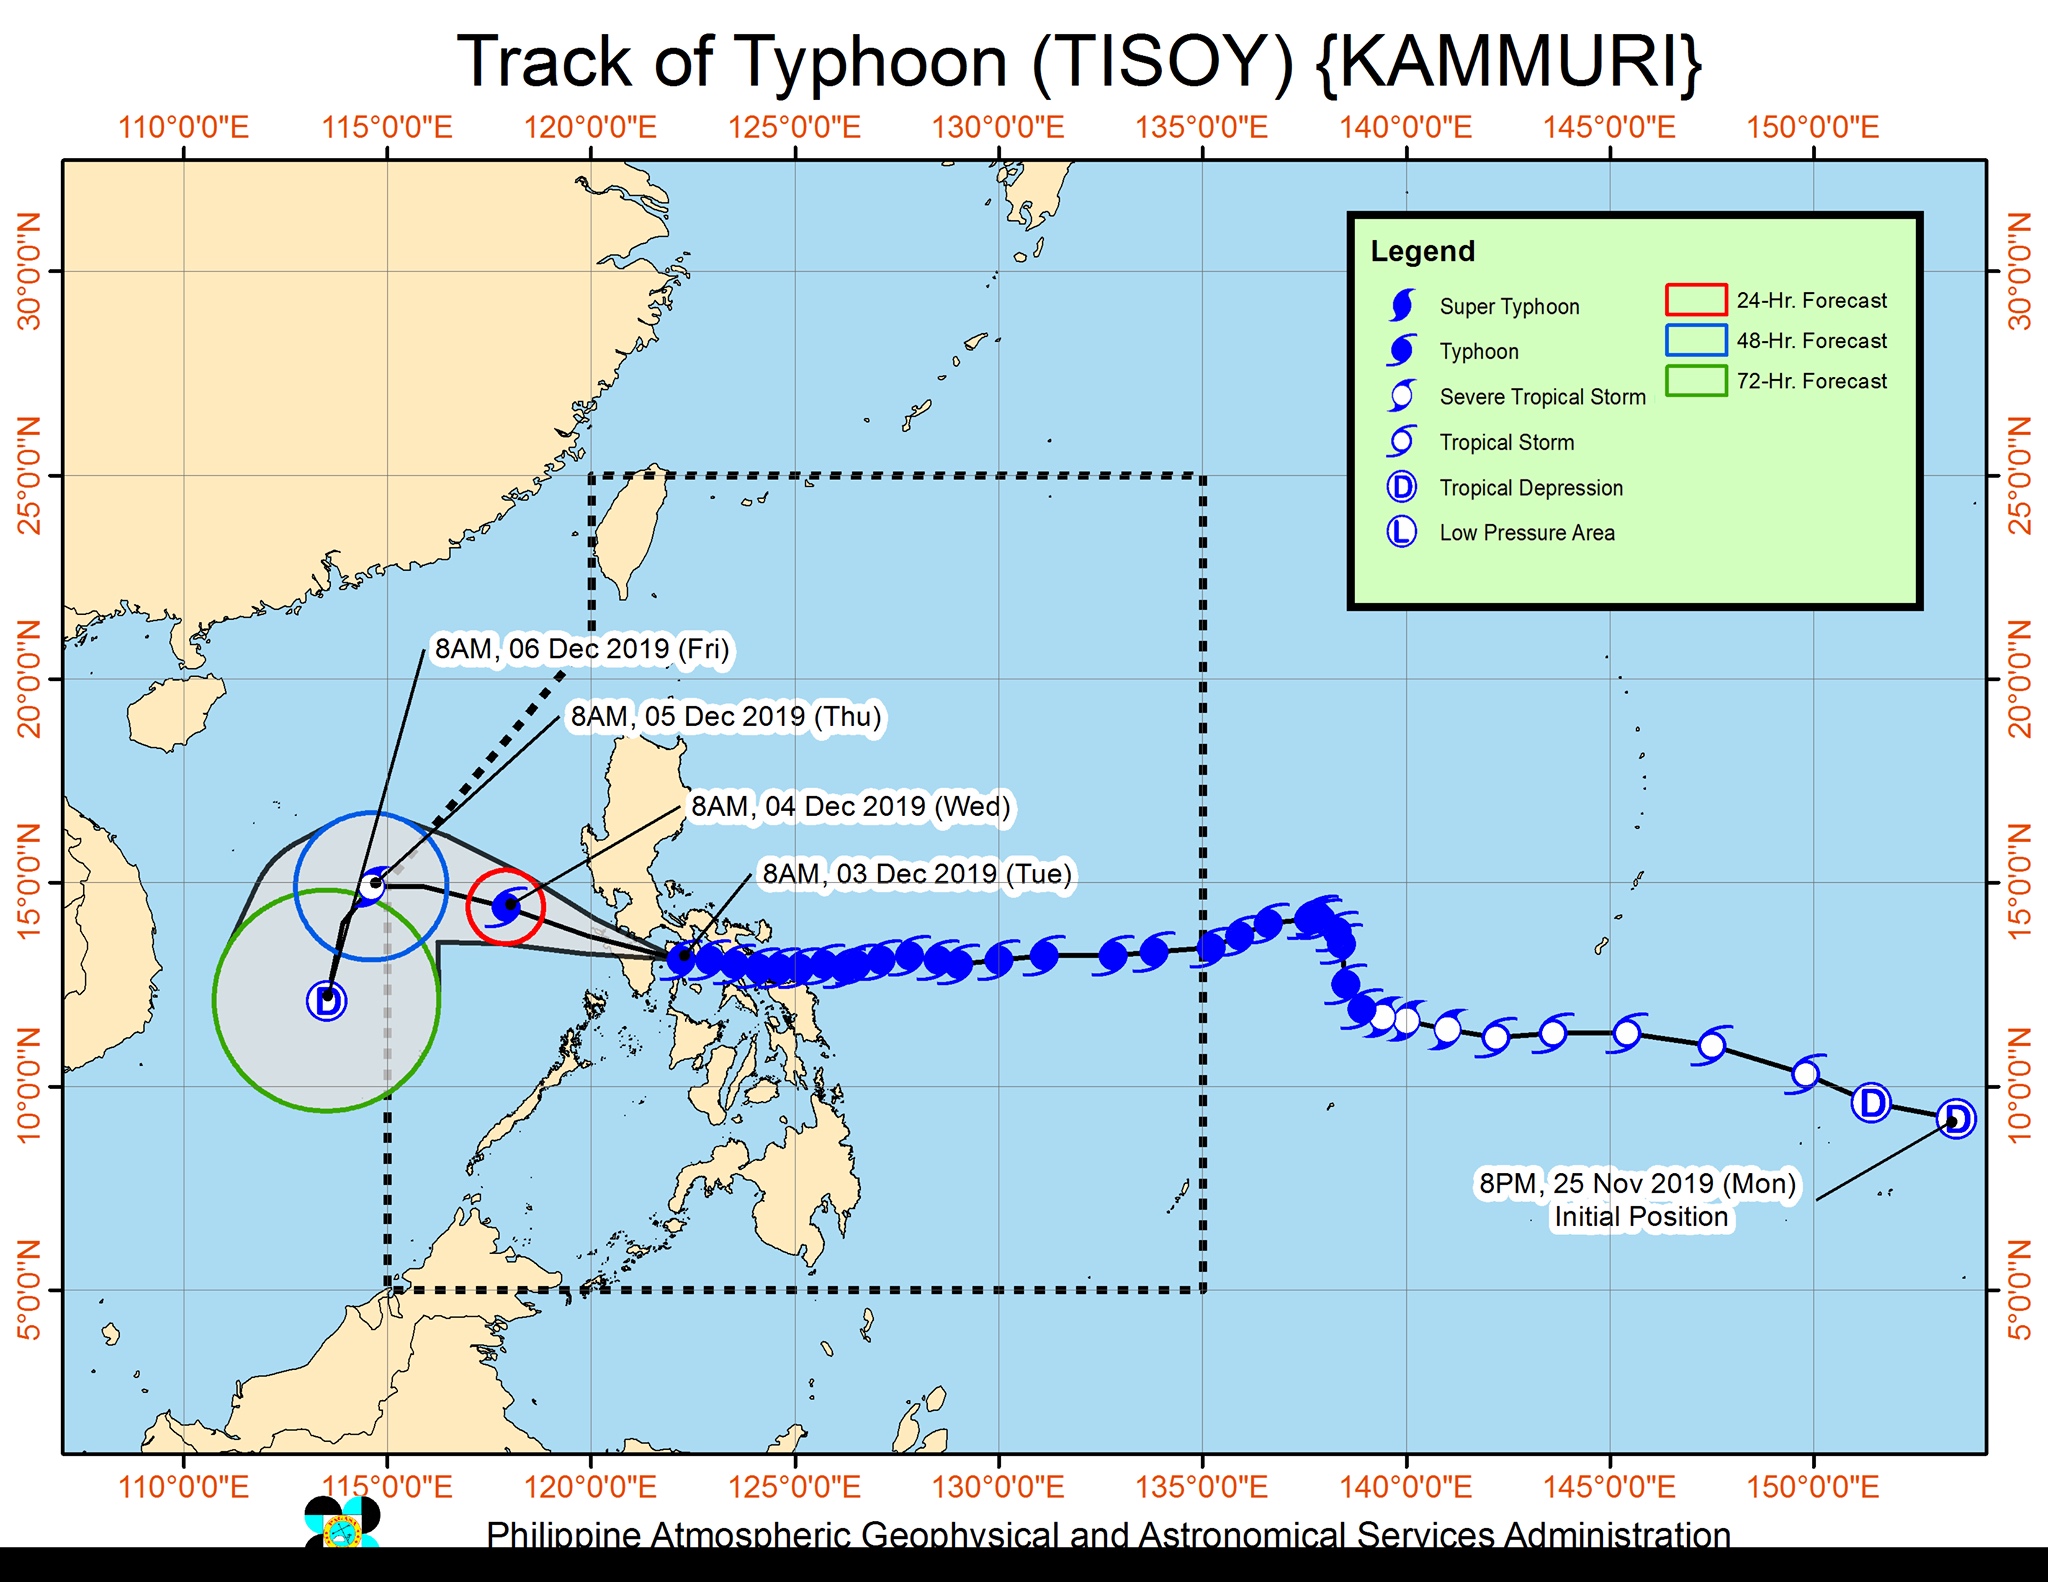 Forecast track of Typhoon Tisoy (Kammuri) as of December 3, 2019, 11 am. Image from PAGASA 